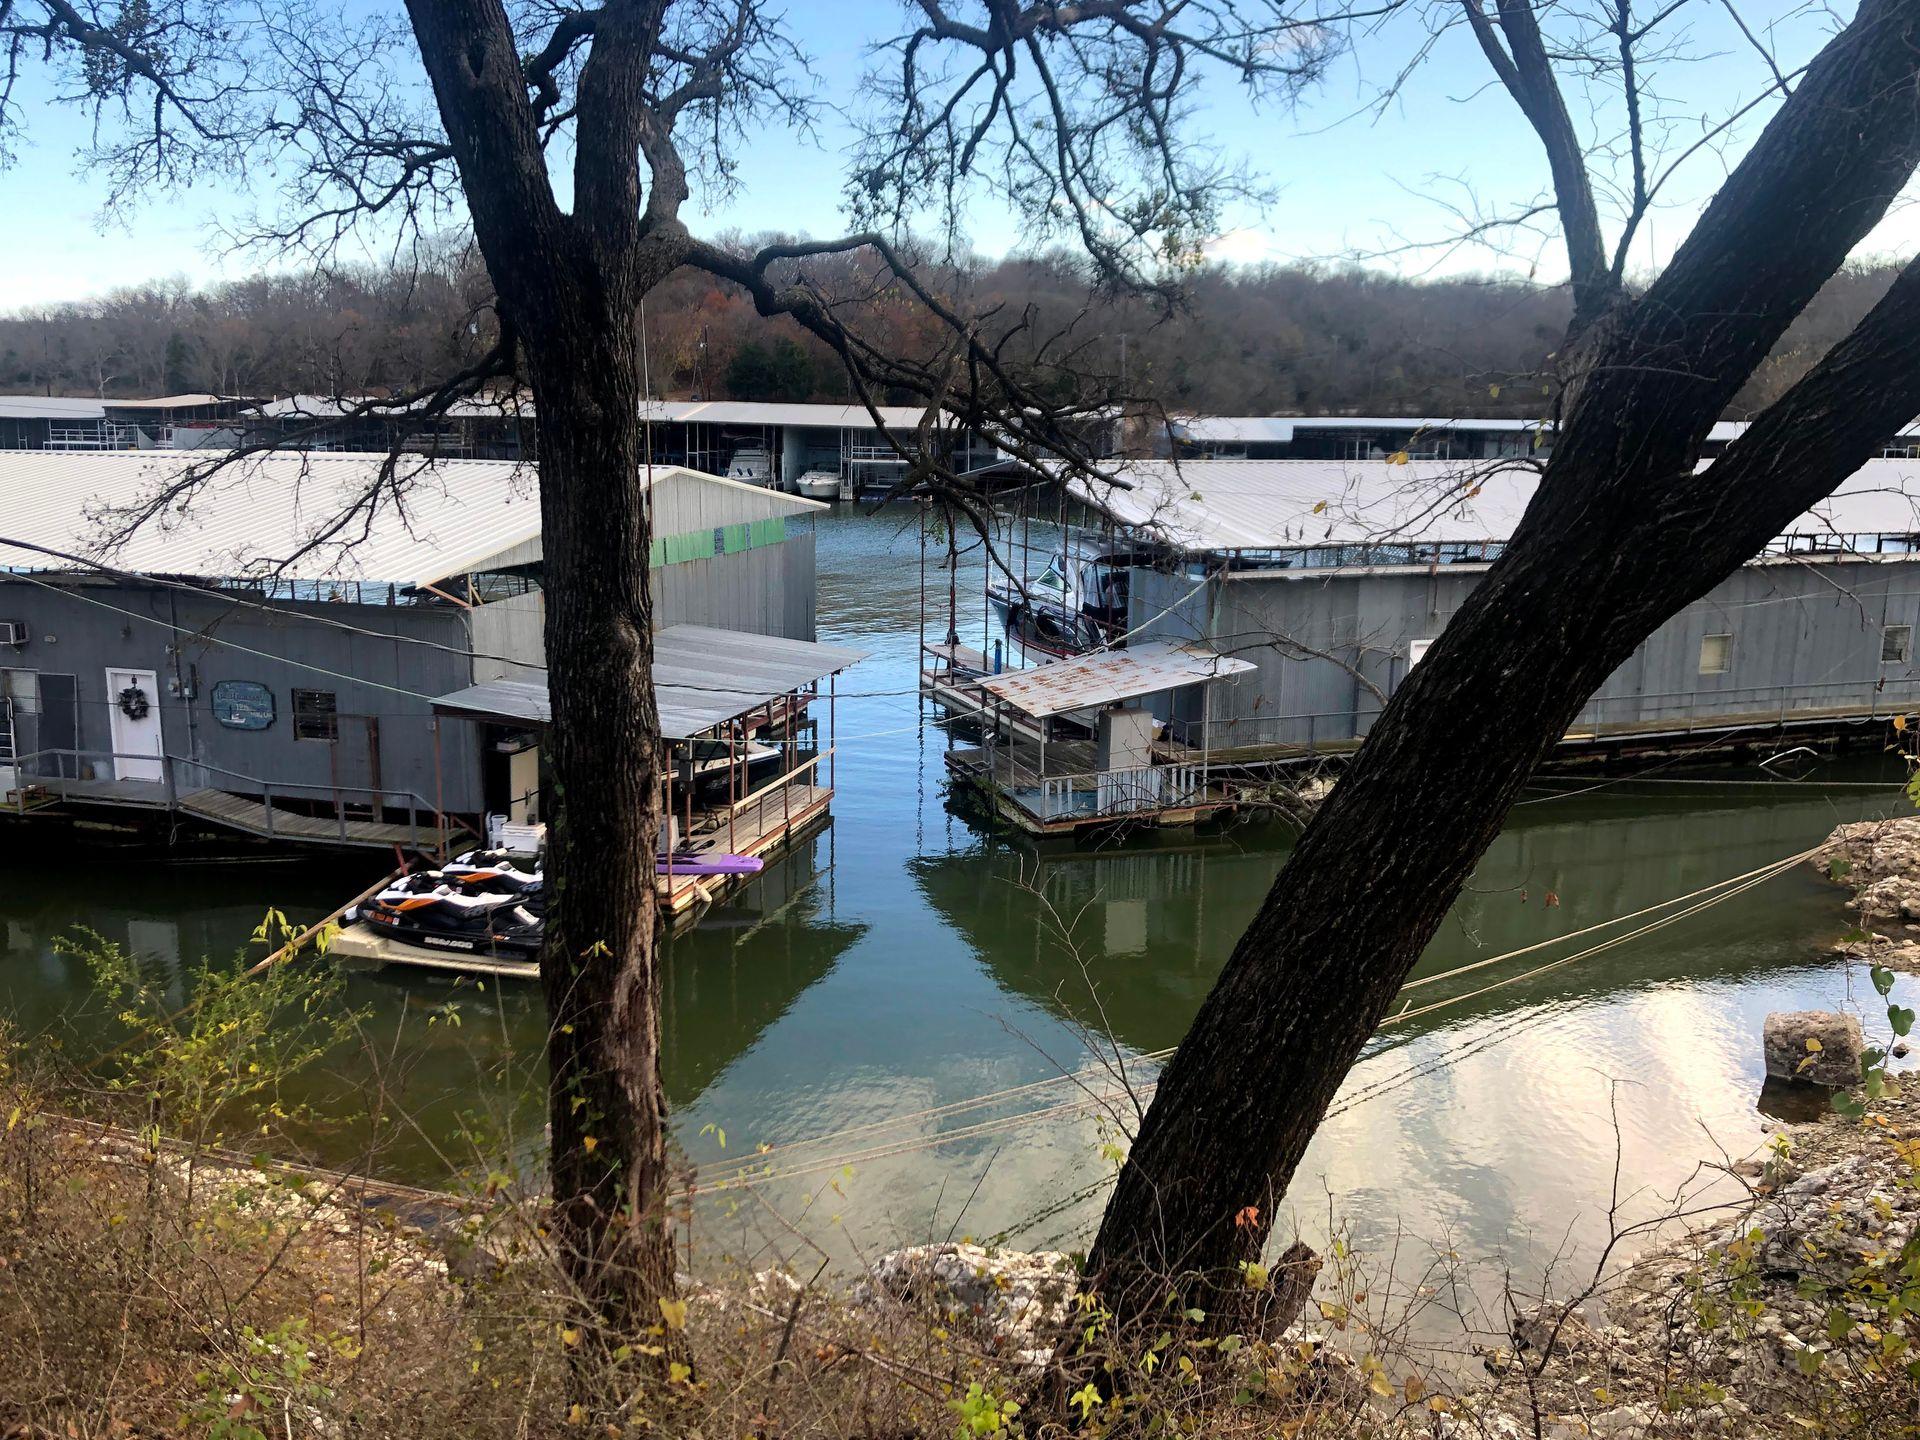 Some floating houses and boats at the dock at Eisenhower Yacht Club.